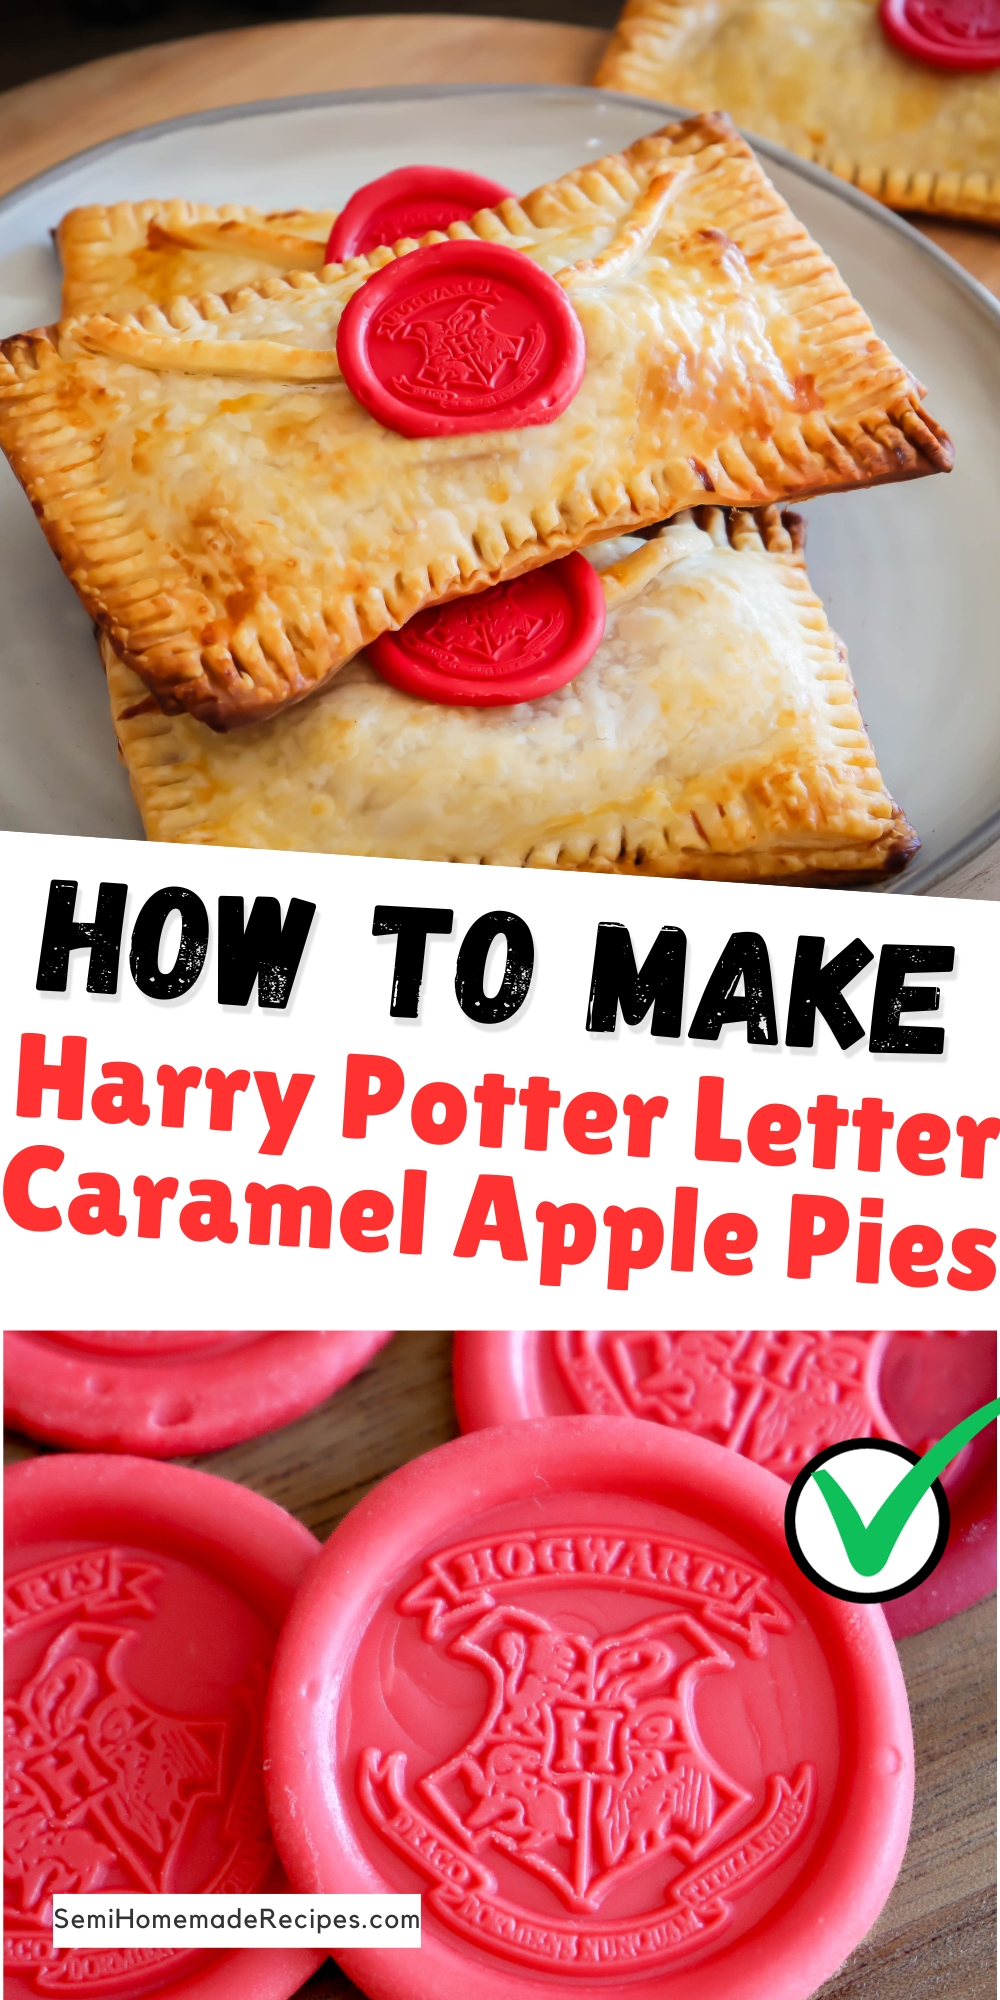 Harry Potter received his Hogwarts letter and you can too! Well, you can have the caramel apple pie version of his letter! These Harry Potter Letter Caramel Apple Pies hand pies are made to look like Harry's Hogwarts letter, complete with an edible Hogwarts candy "wax seal".